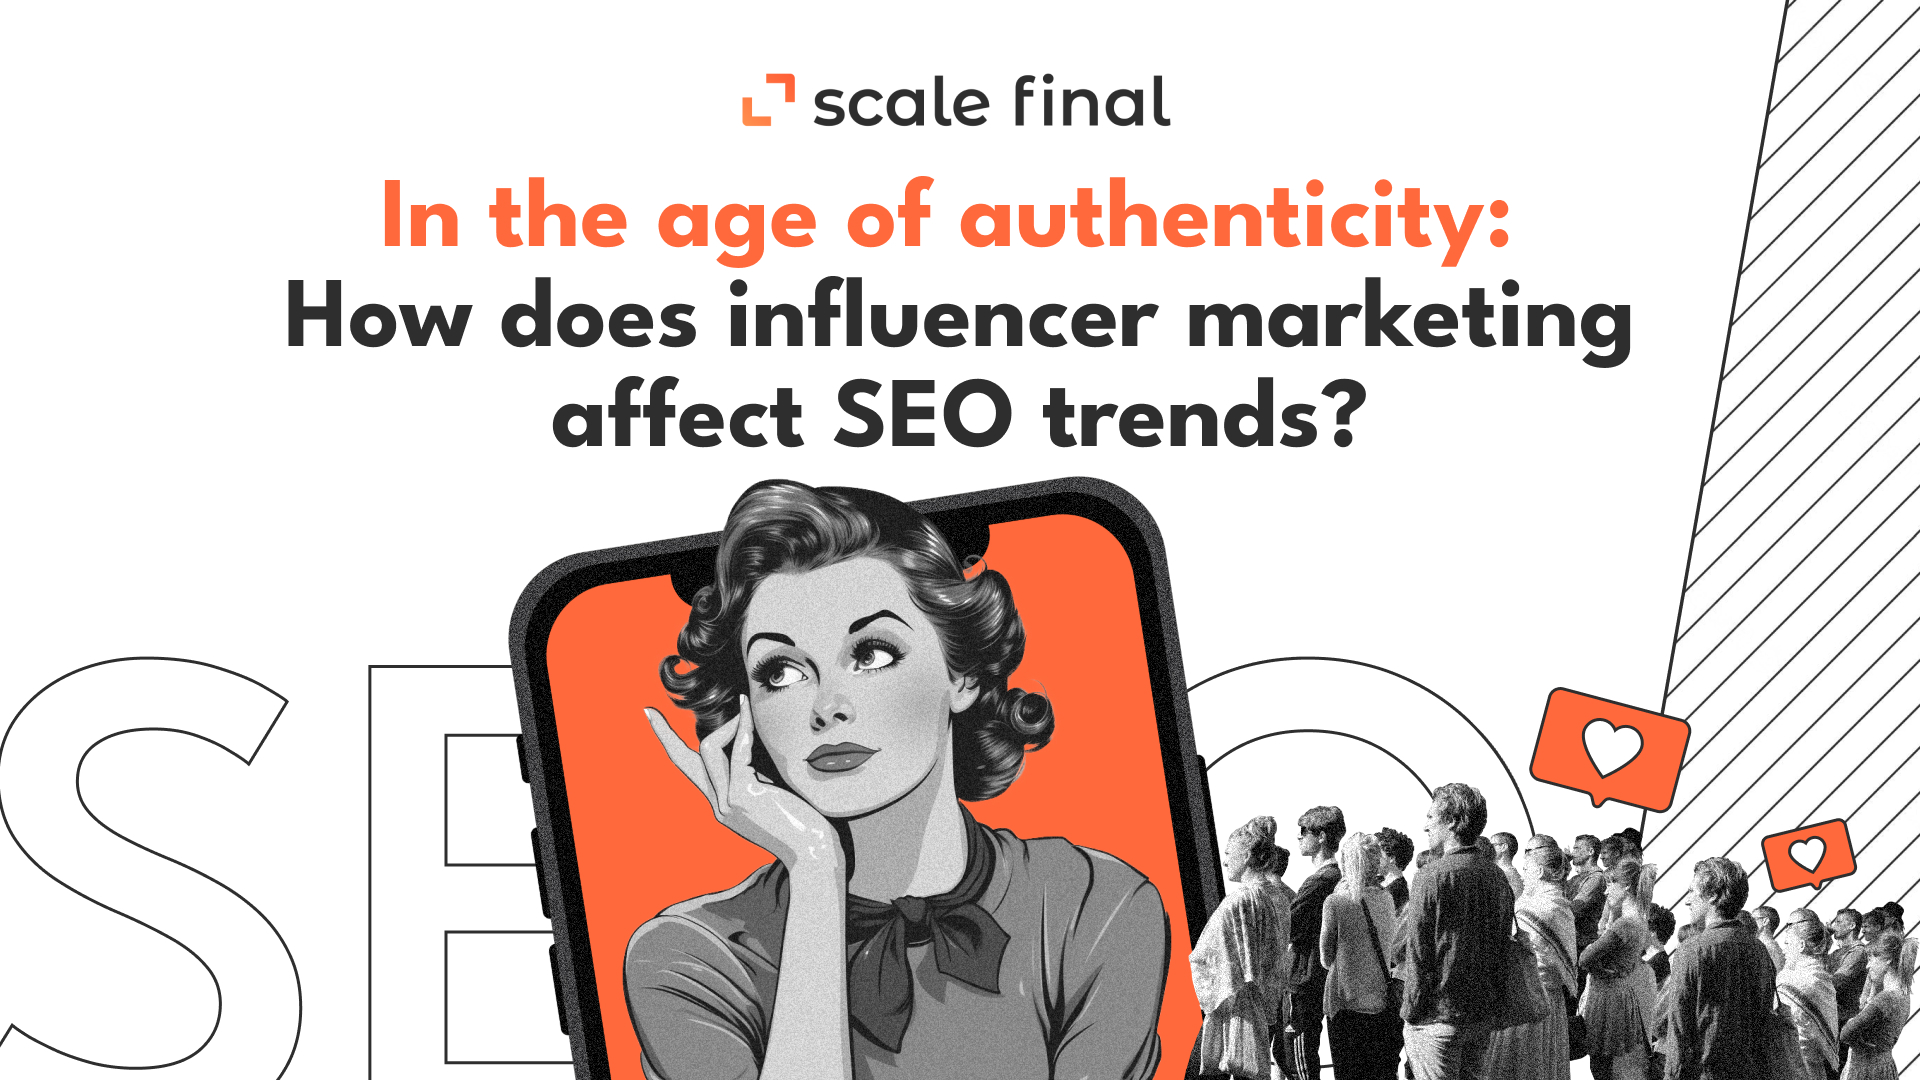 In the age of authenticity: How does influencer marketing affect SEO trends?